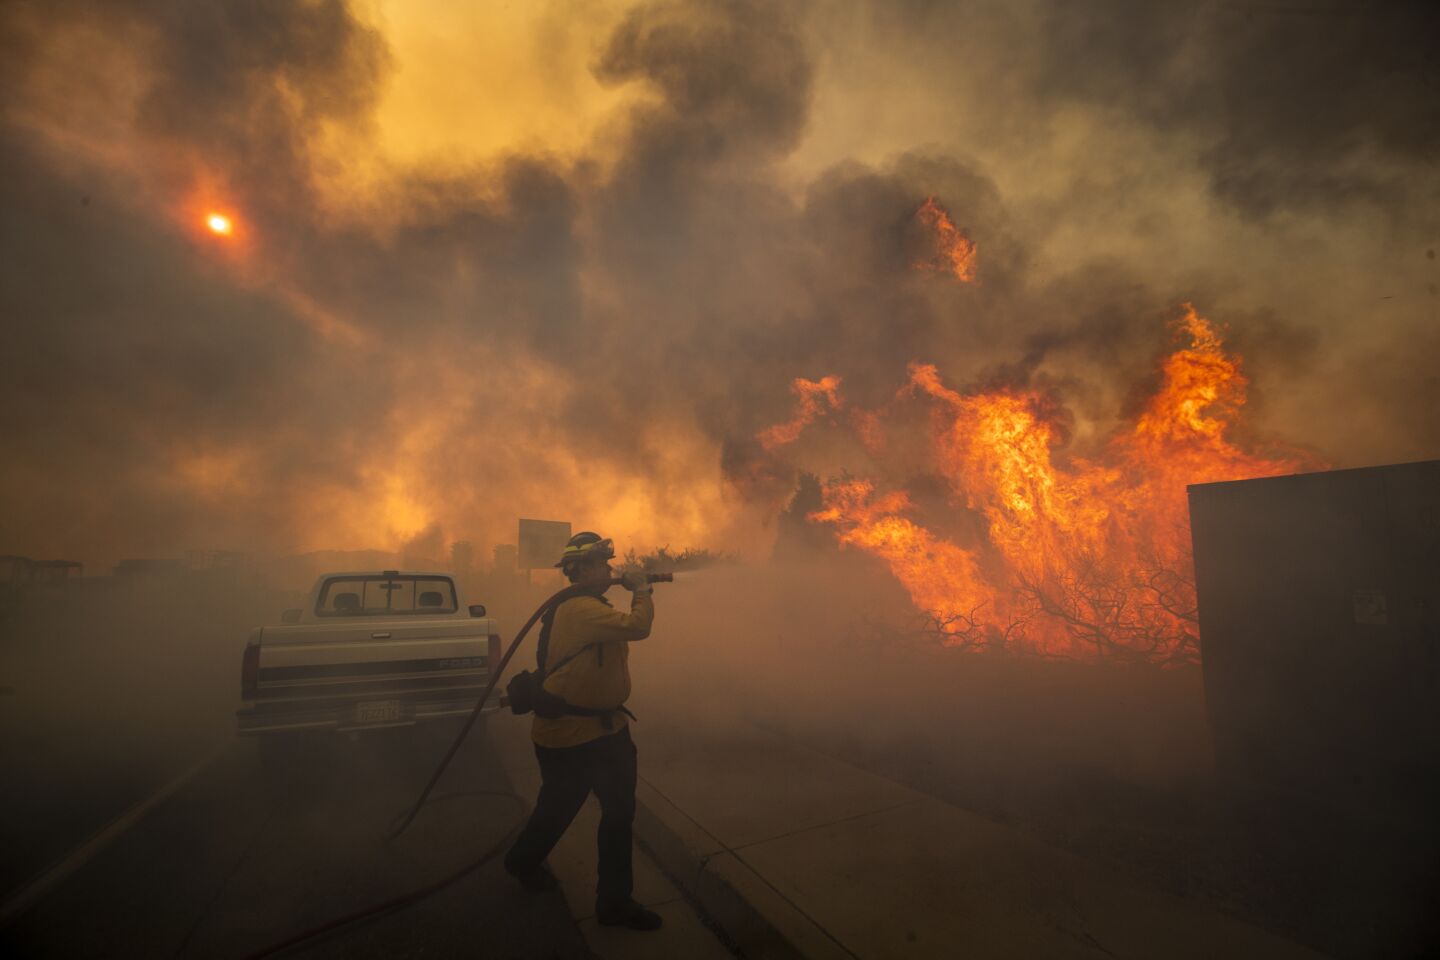 A firefighter amid smoke sprays water on flames